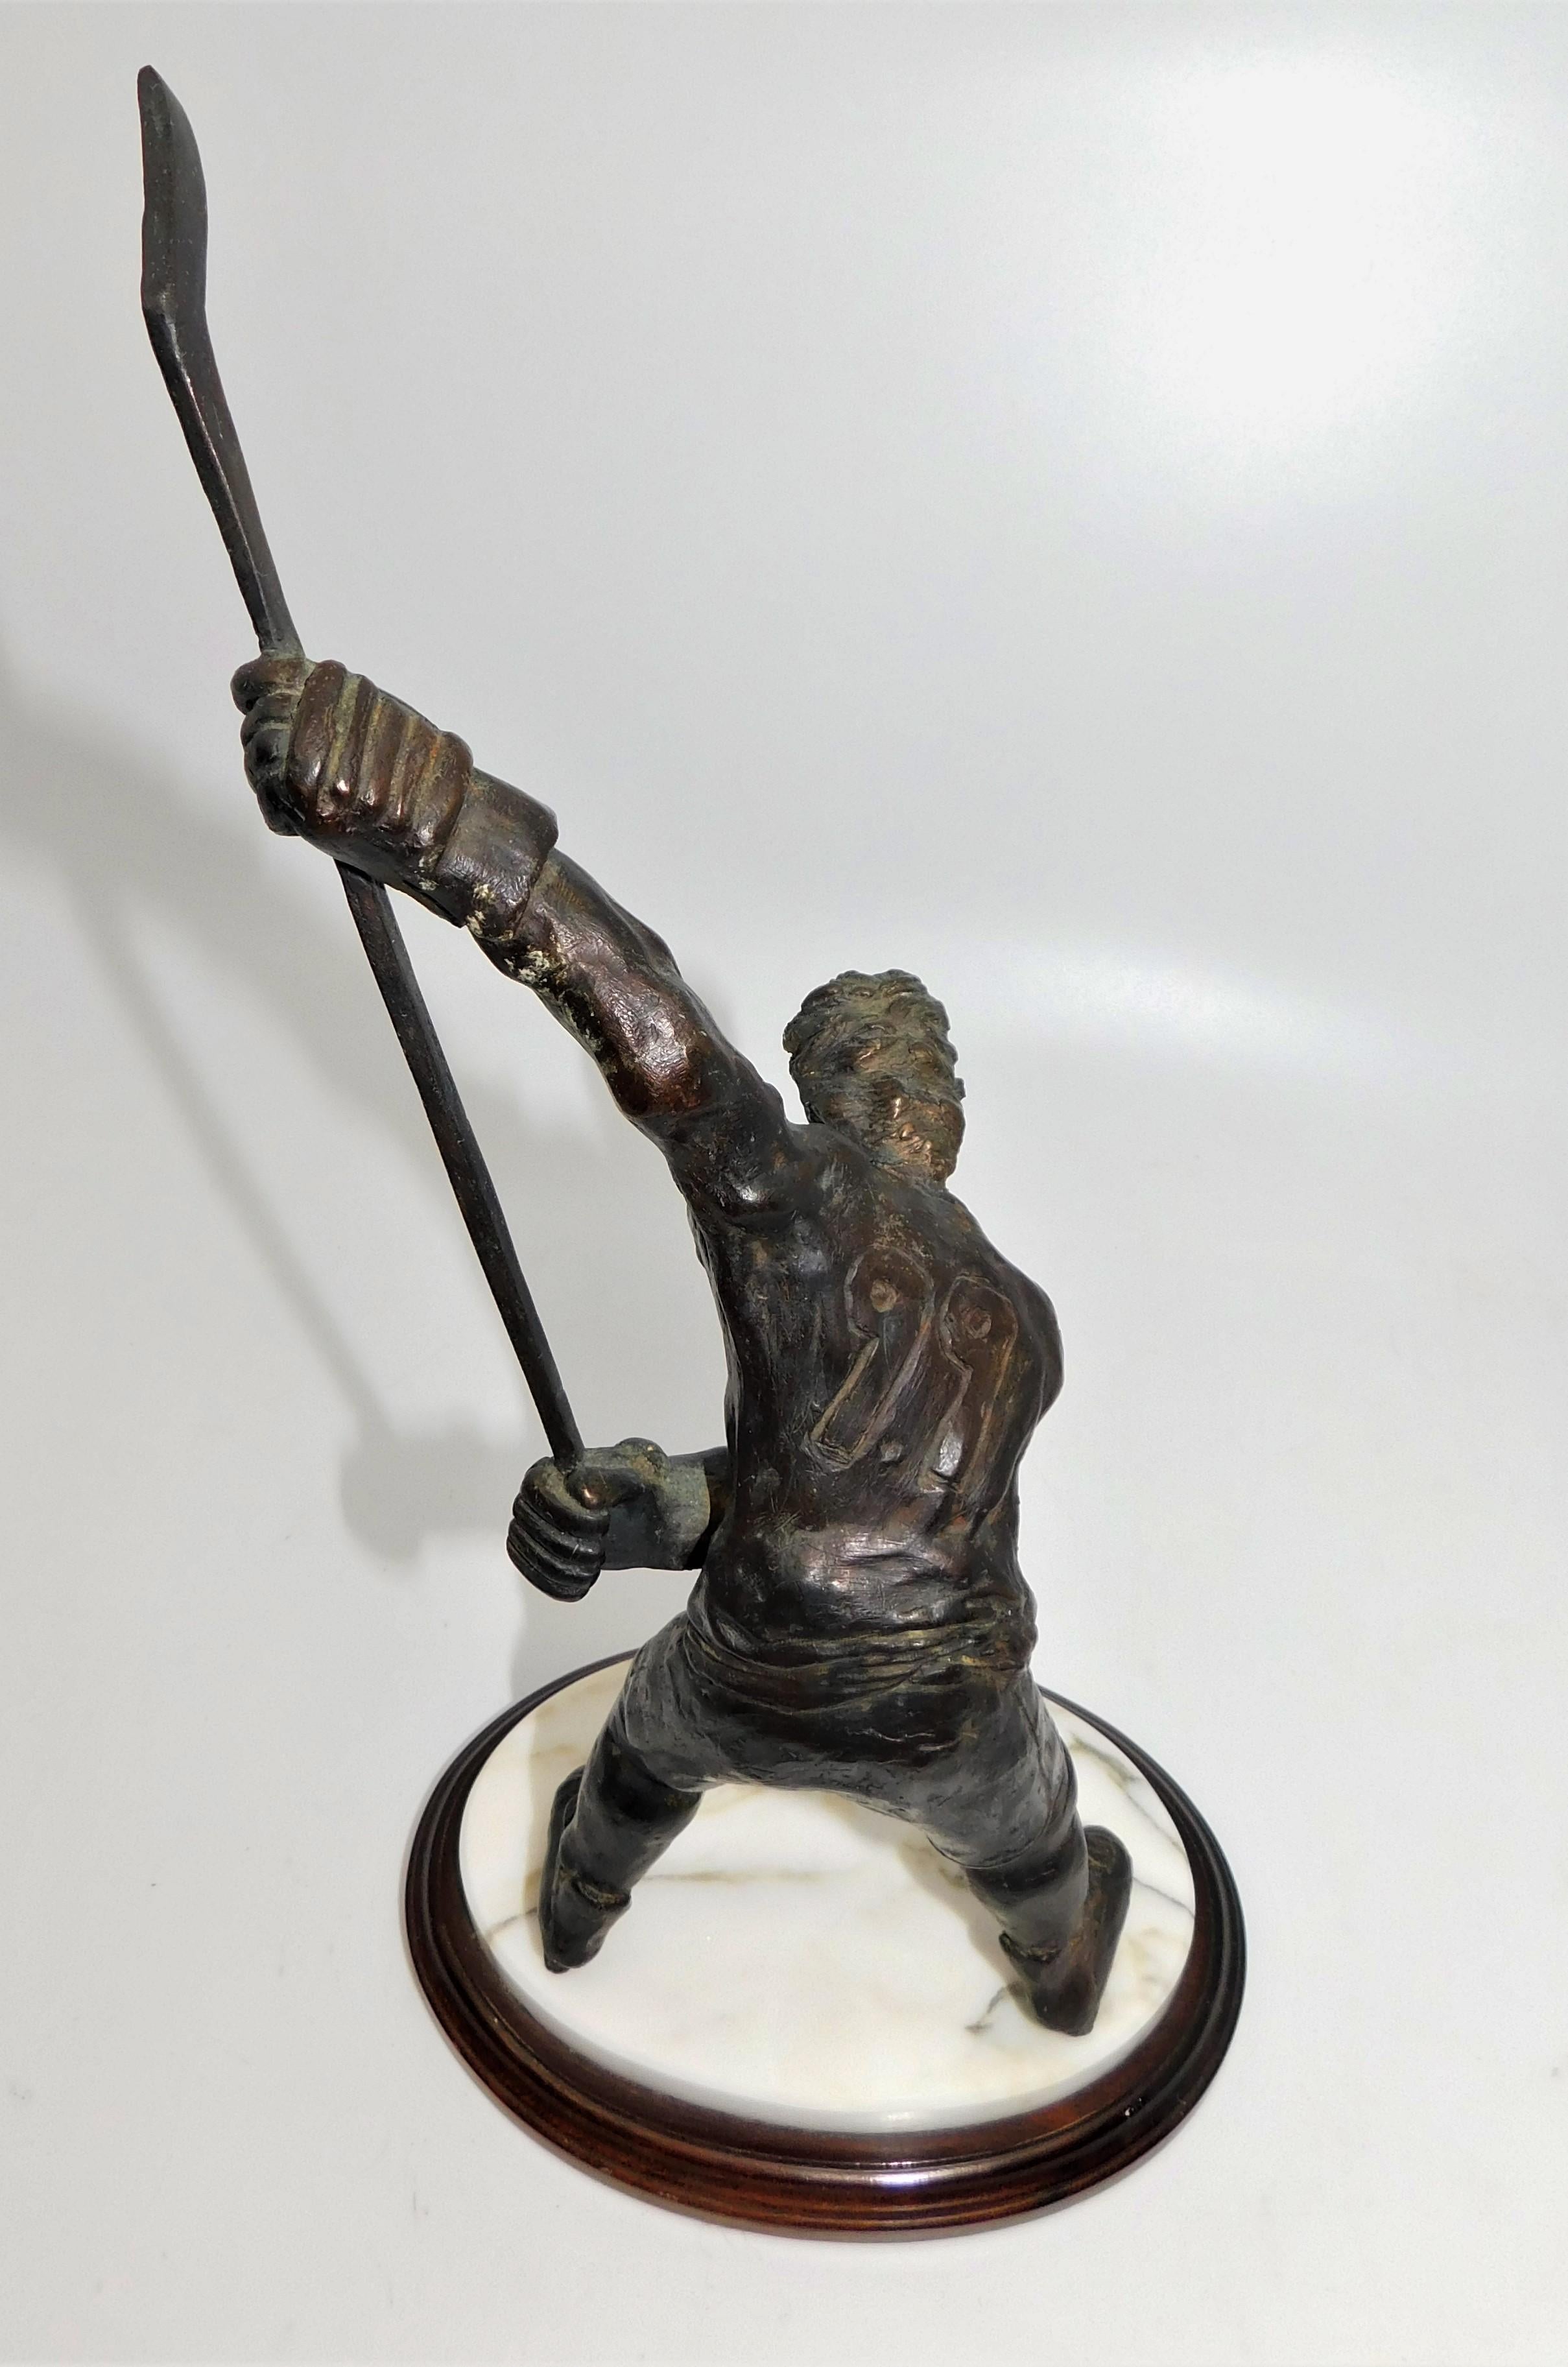 Hand-Crafted Wayne Gretzky 1985 Limited-Edition Hand Sculpted Bronze Statue #20/200